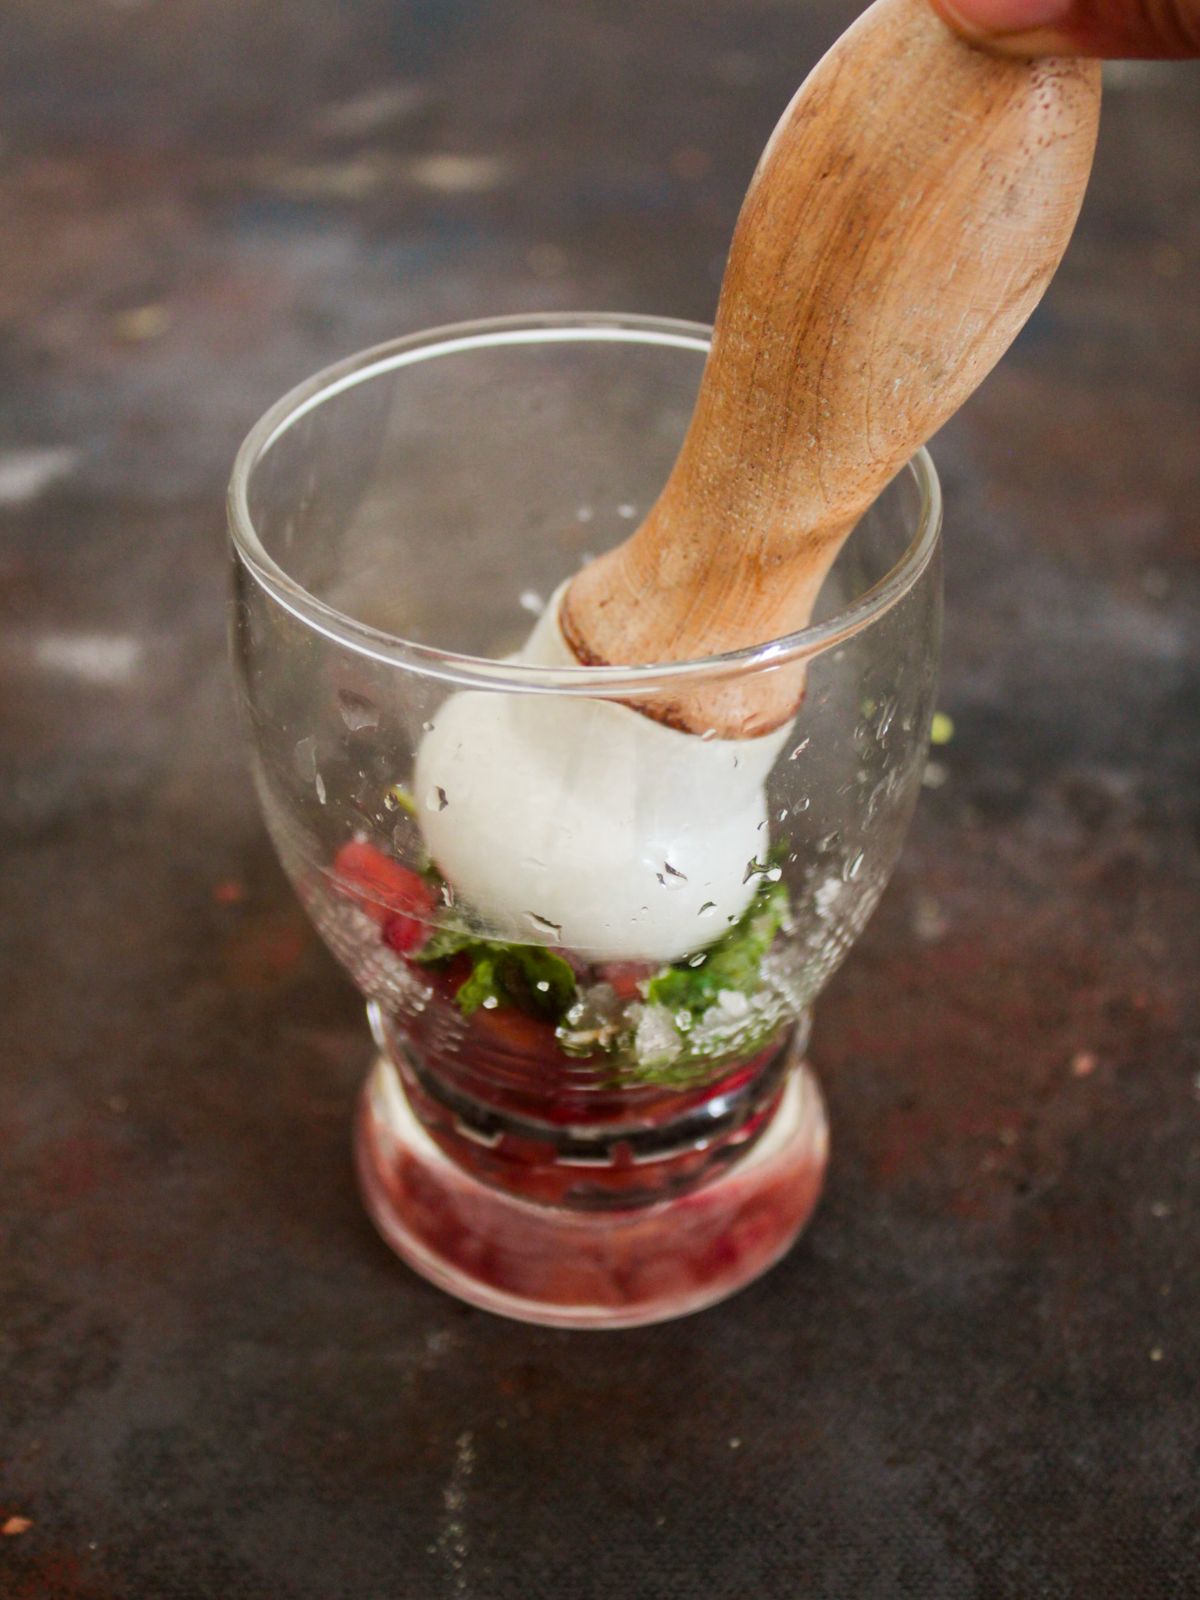 Wooden masher in glass with mint and pomegranate